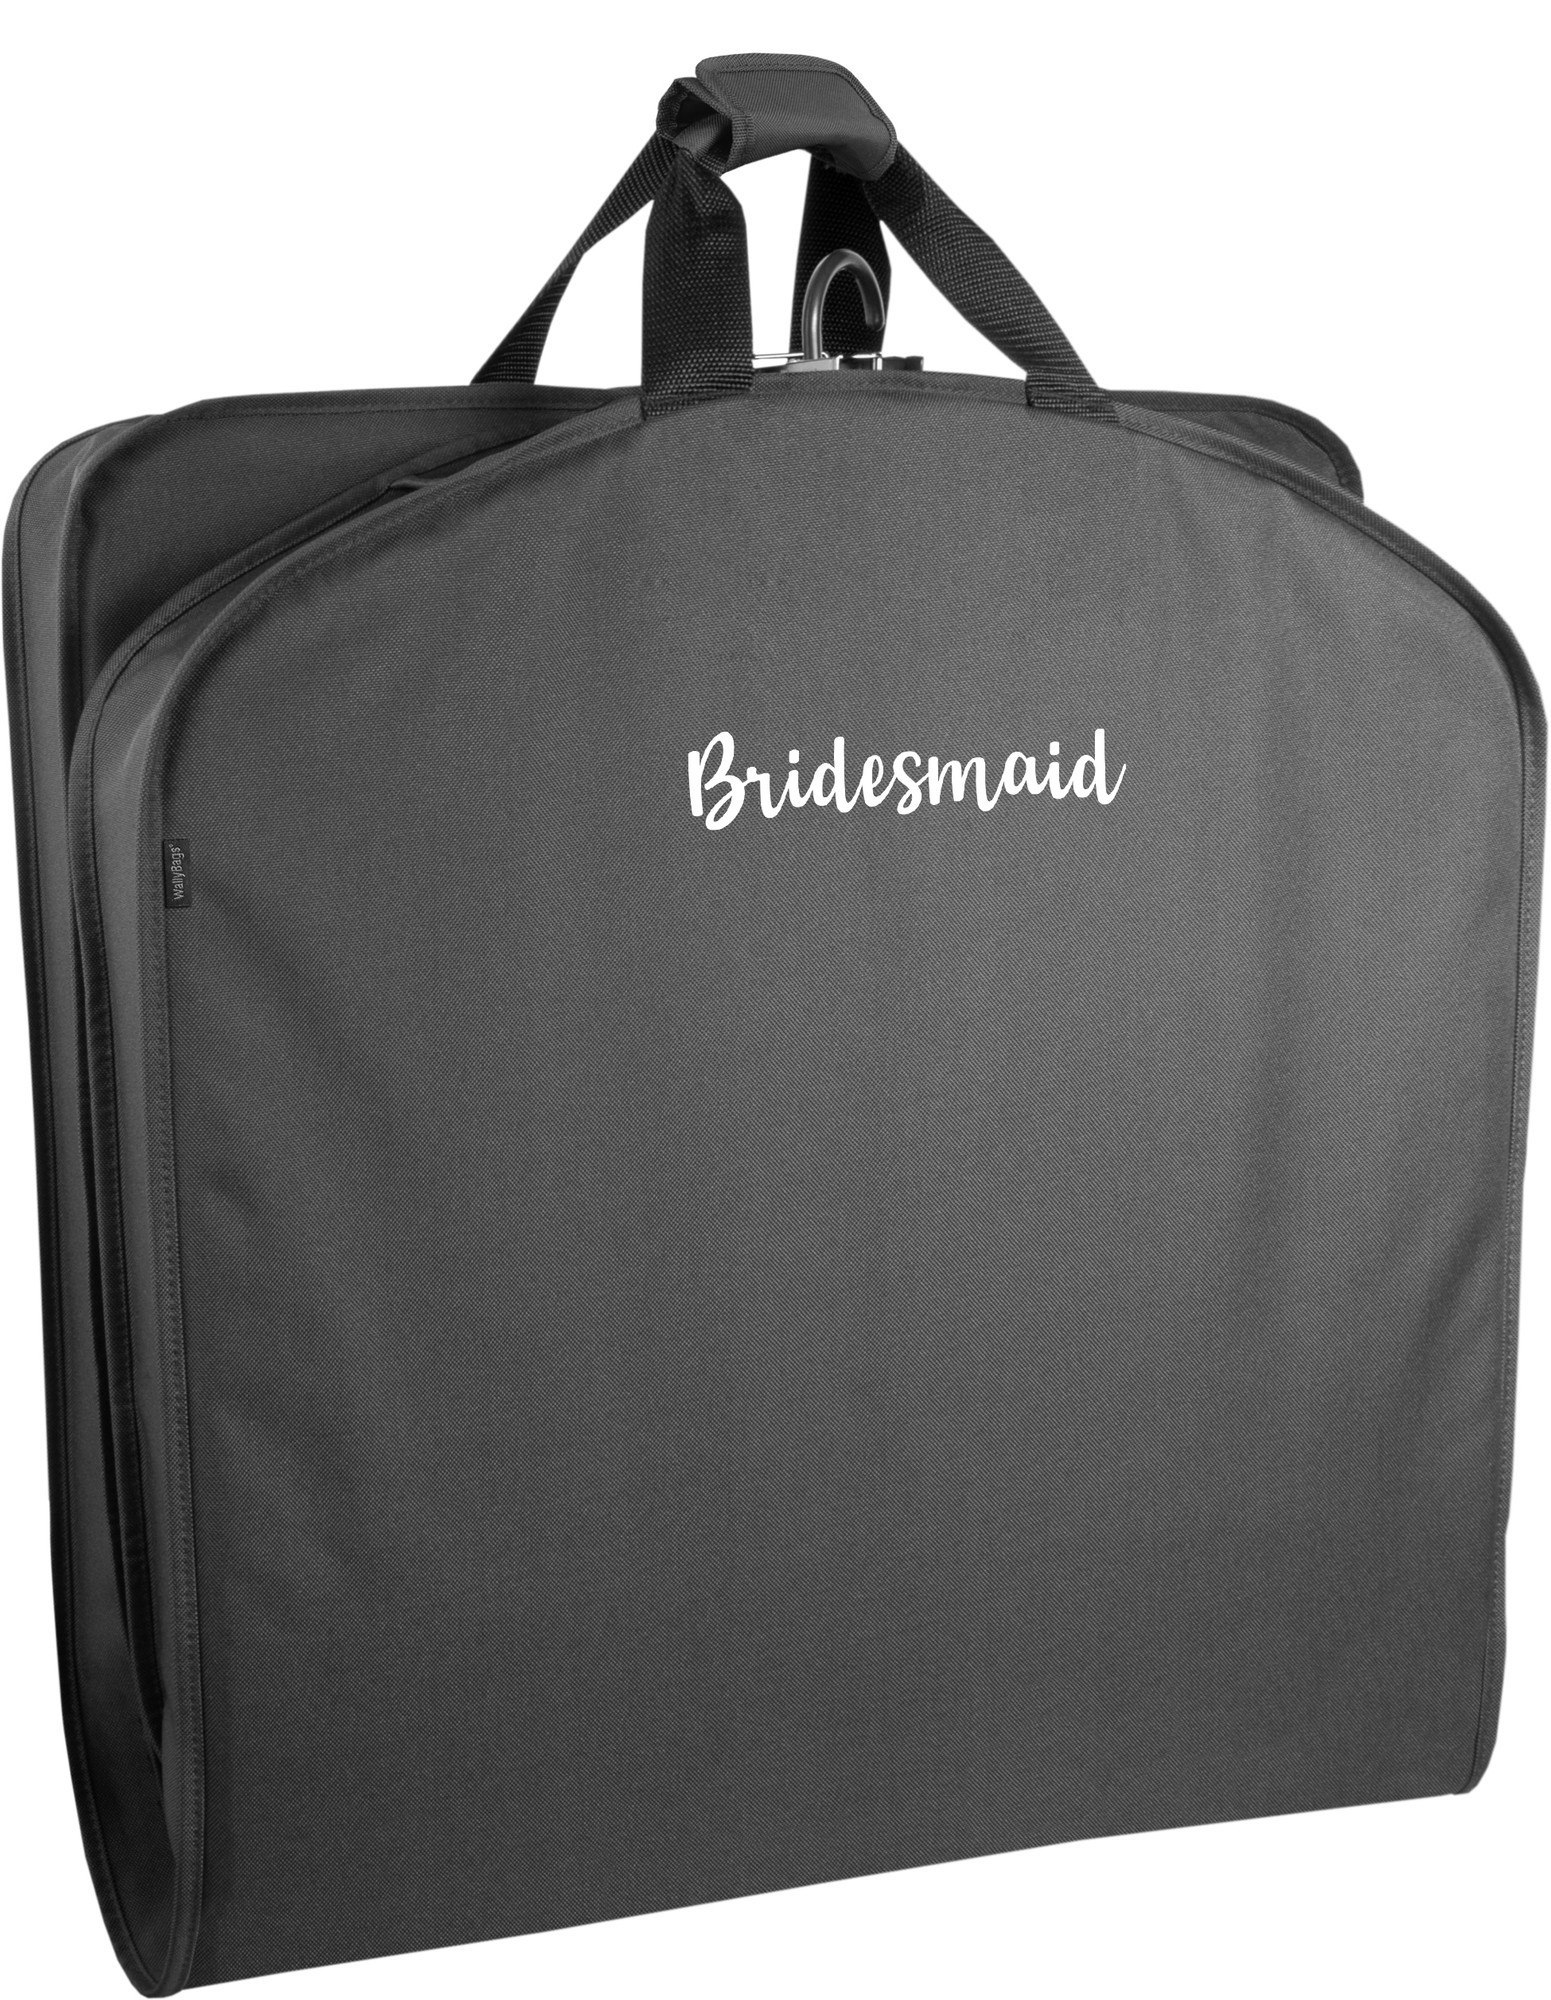 WallyBags  60 Deluxe Travel Garment Bag with Bridesmaid